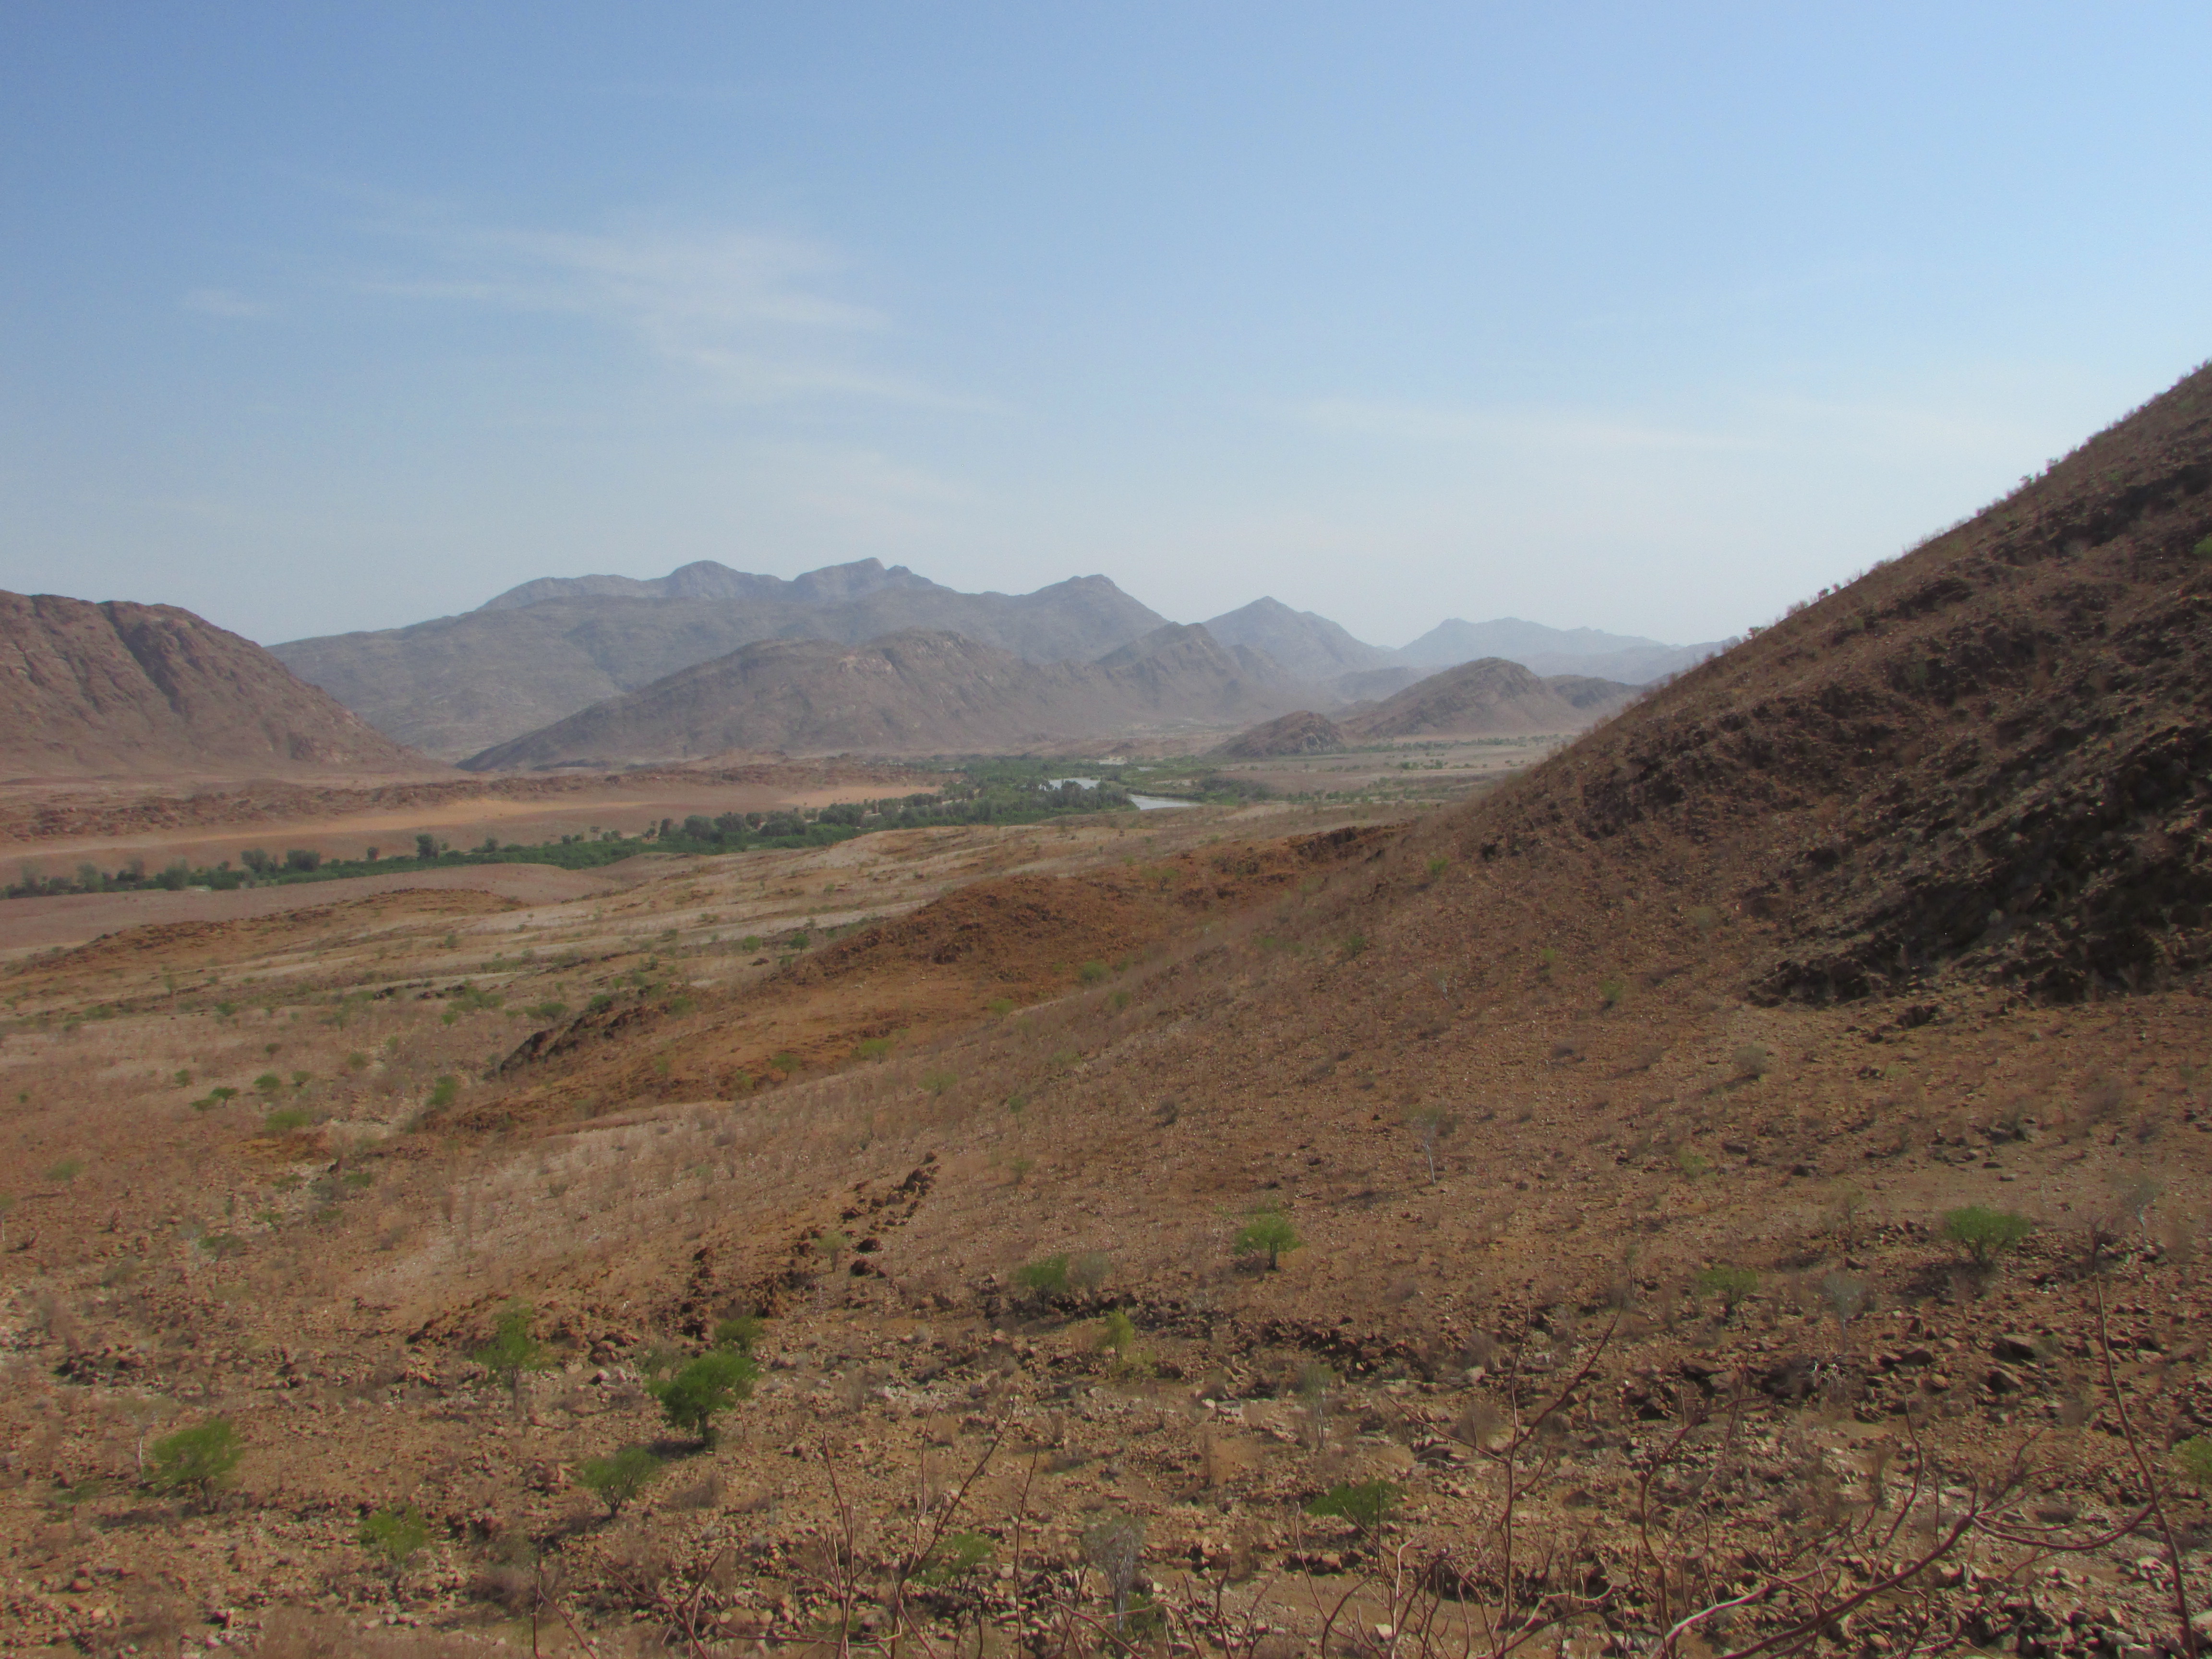 View on the Kunene river at Otjiningua from the Angolan side (Source: V. De Cauwer)